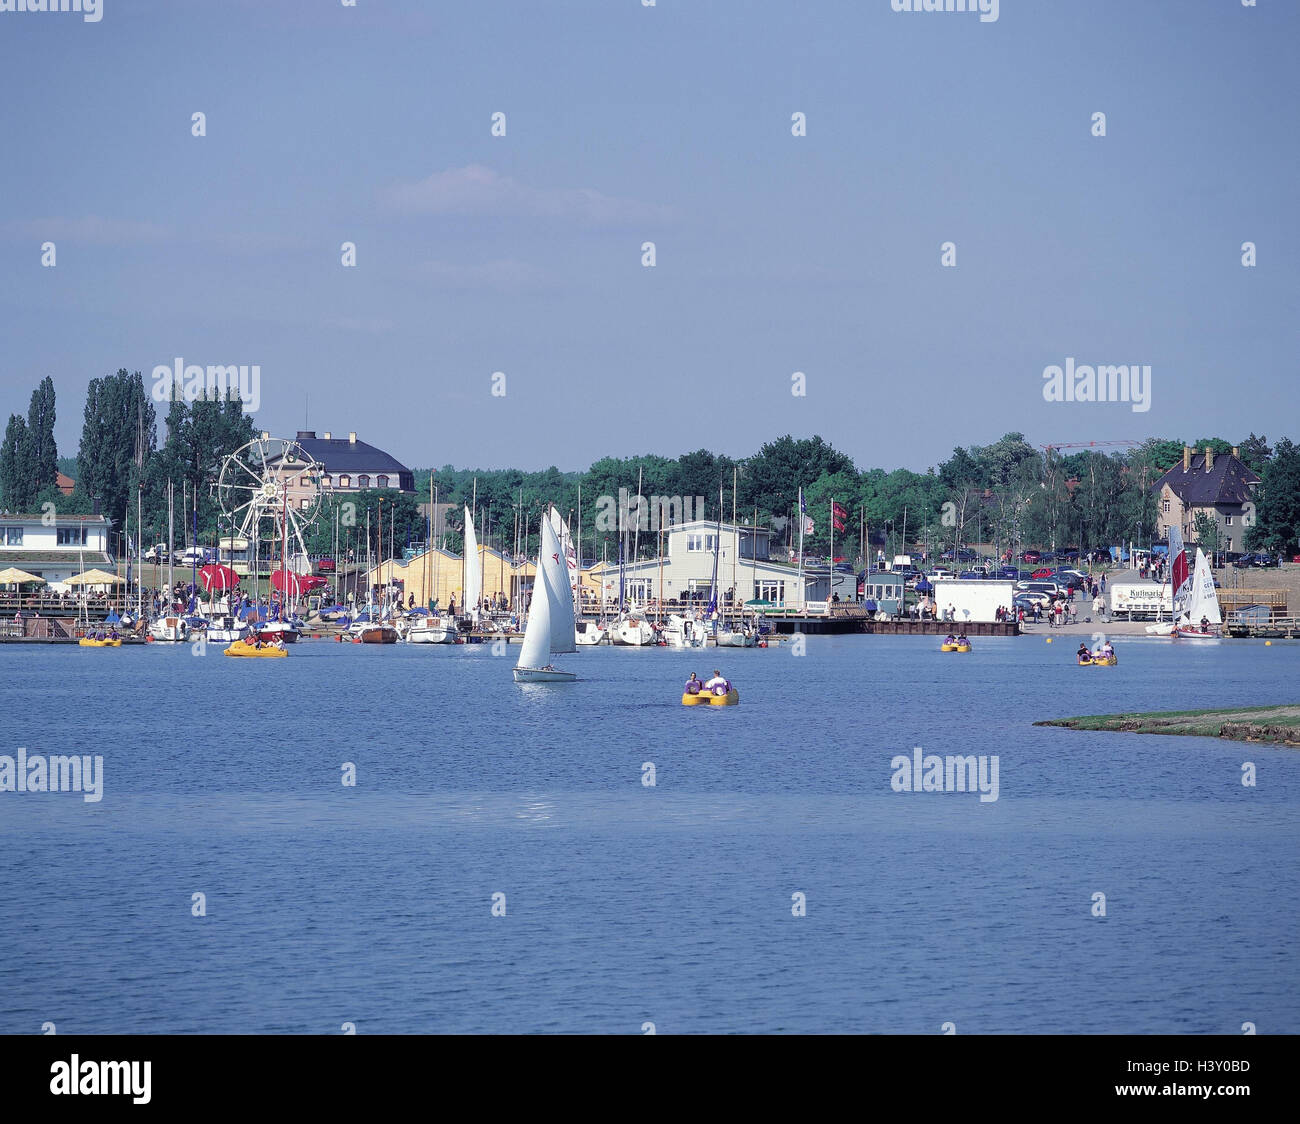 Germany, Saxony, Leipzig, environs, Cospudener lake, mark clover mountain, harbour harbour cafe, harbour, landing stage, sailboats, pedal boats, lakesides, outside Stock Photo